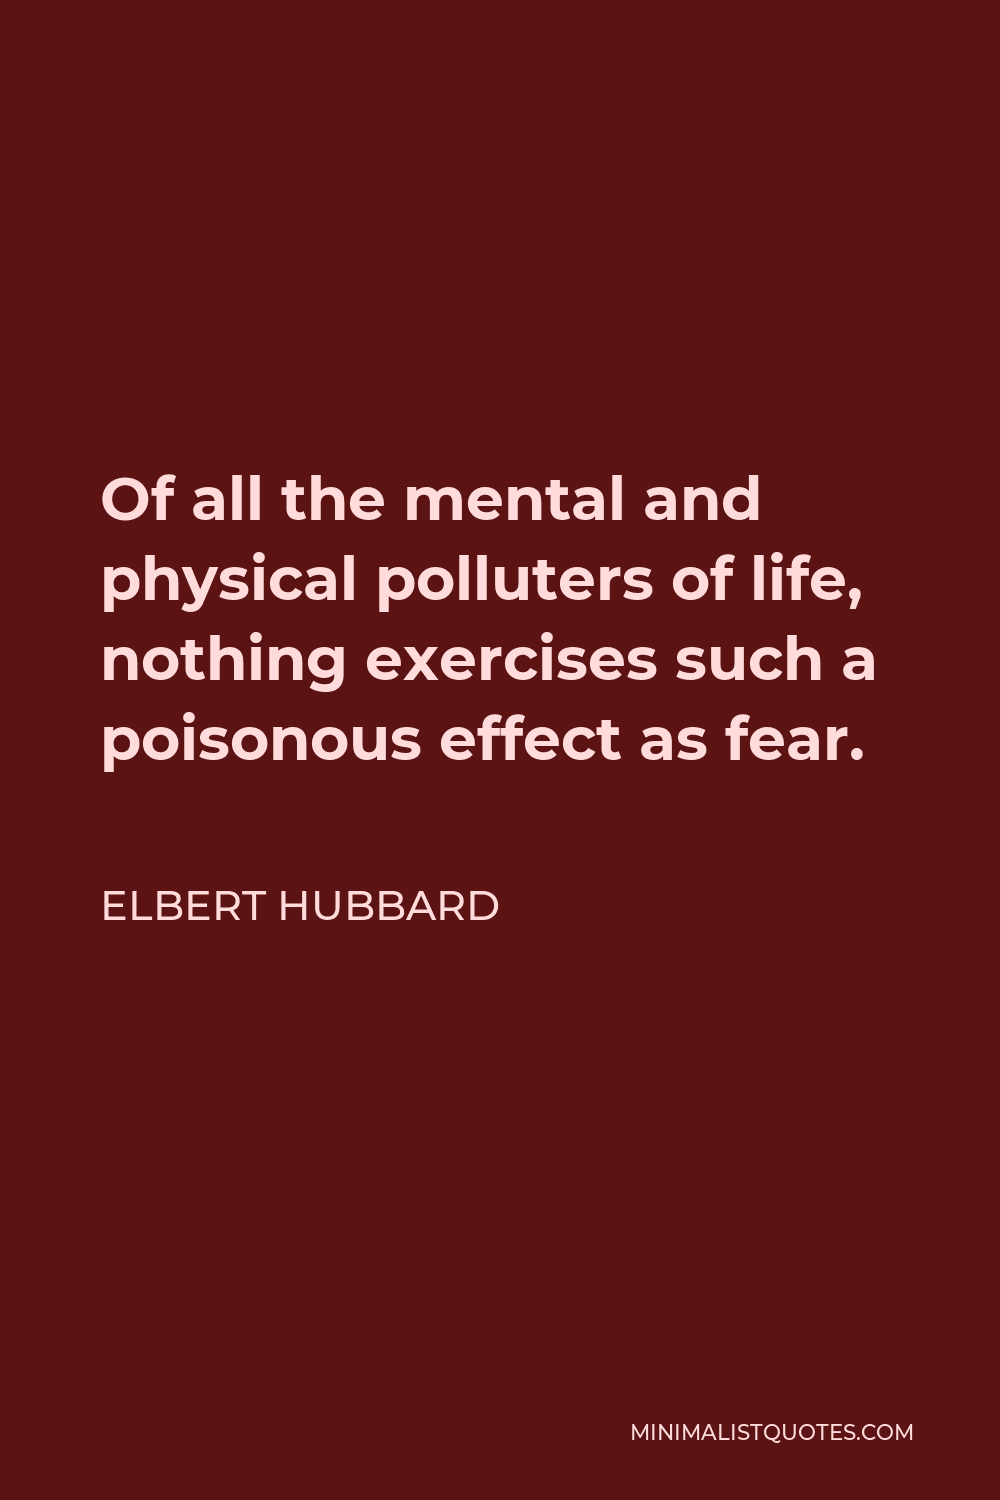 Elbert Hubbard Quote - Of all the mental and physical polluters of life, nothing exercises such a poisonous effect as fear.